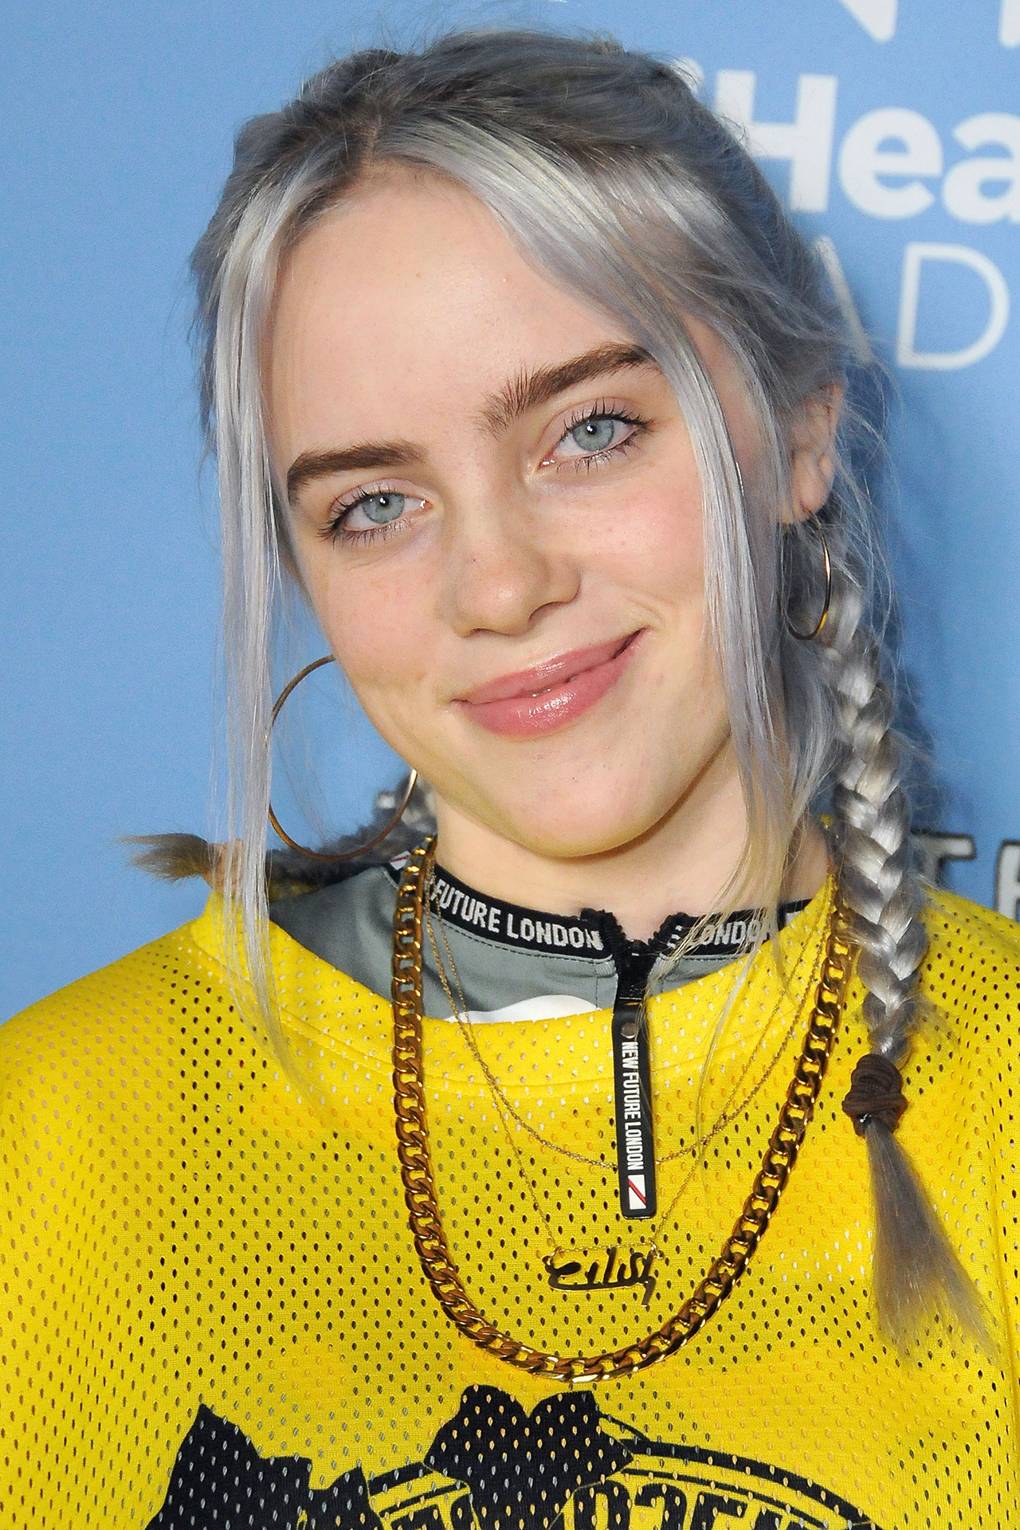 Grammy Awards 2020 Billie Eilish S Gucci Nails May Be Her Best Red Carpet Beauty Look Yet Glamour Uk